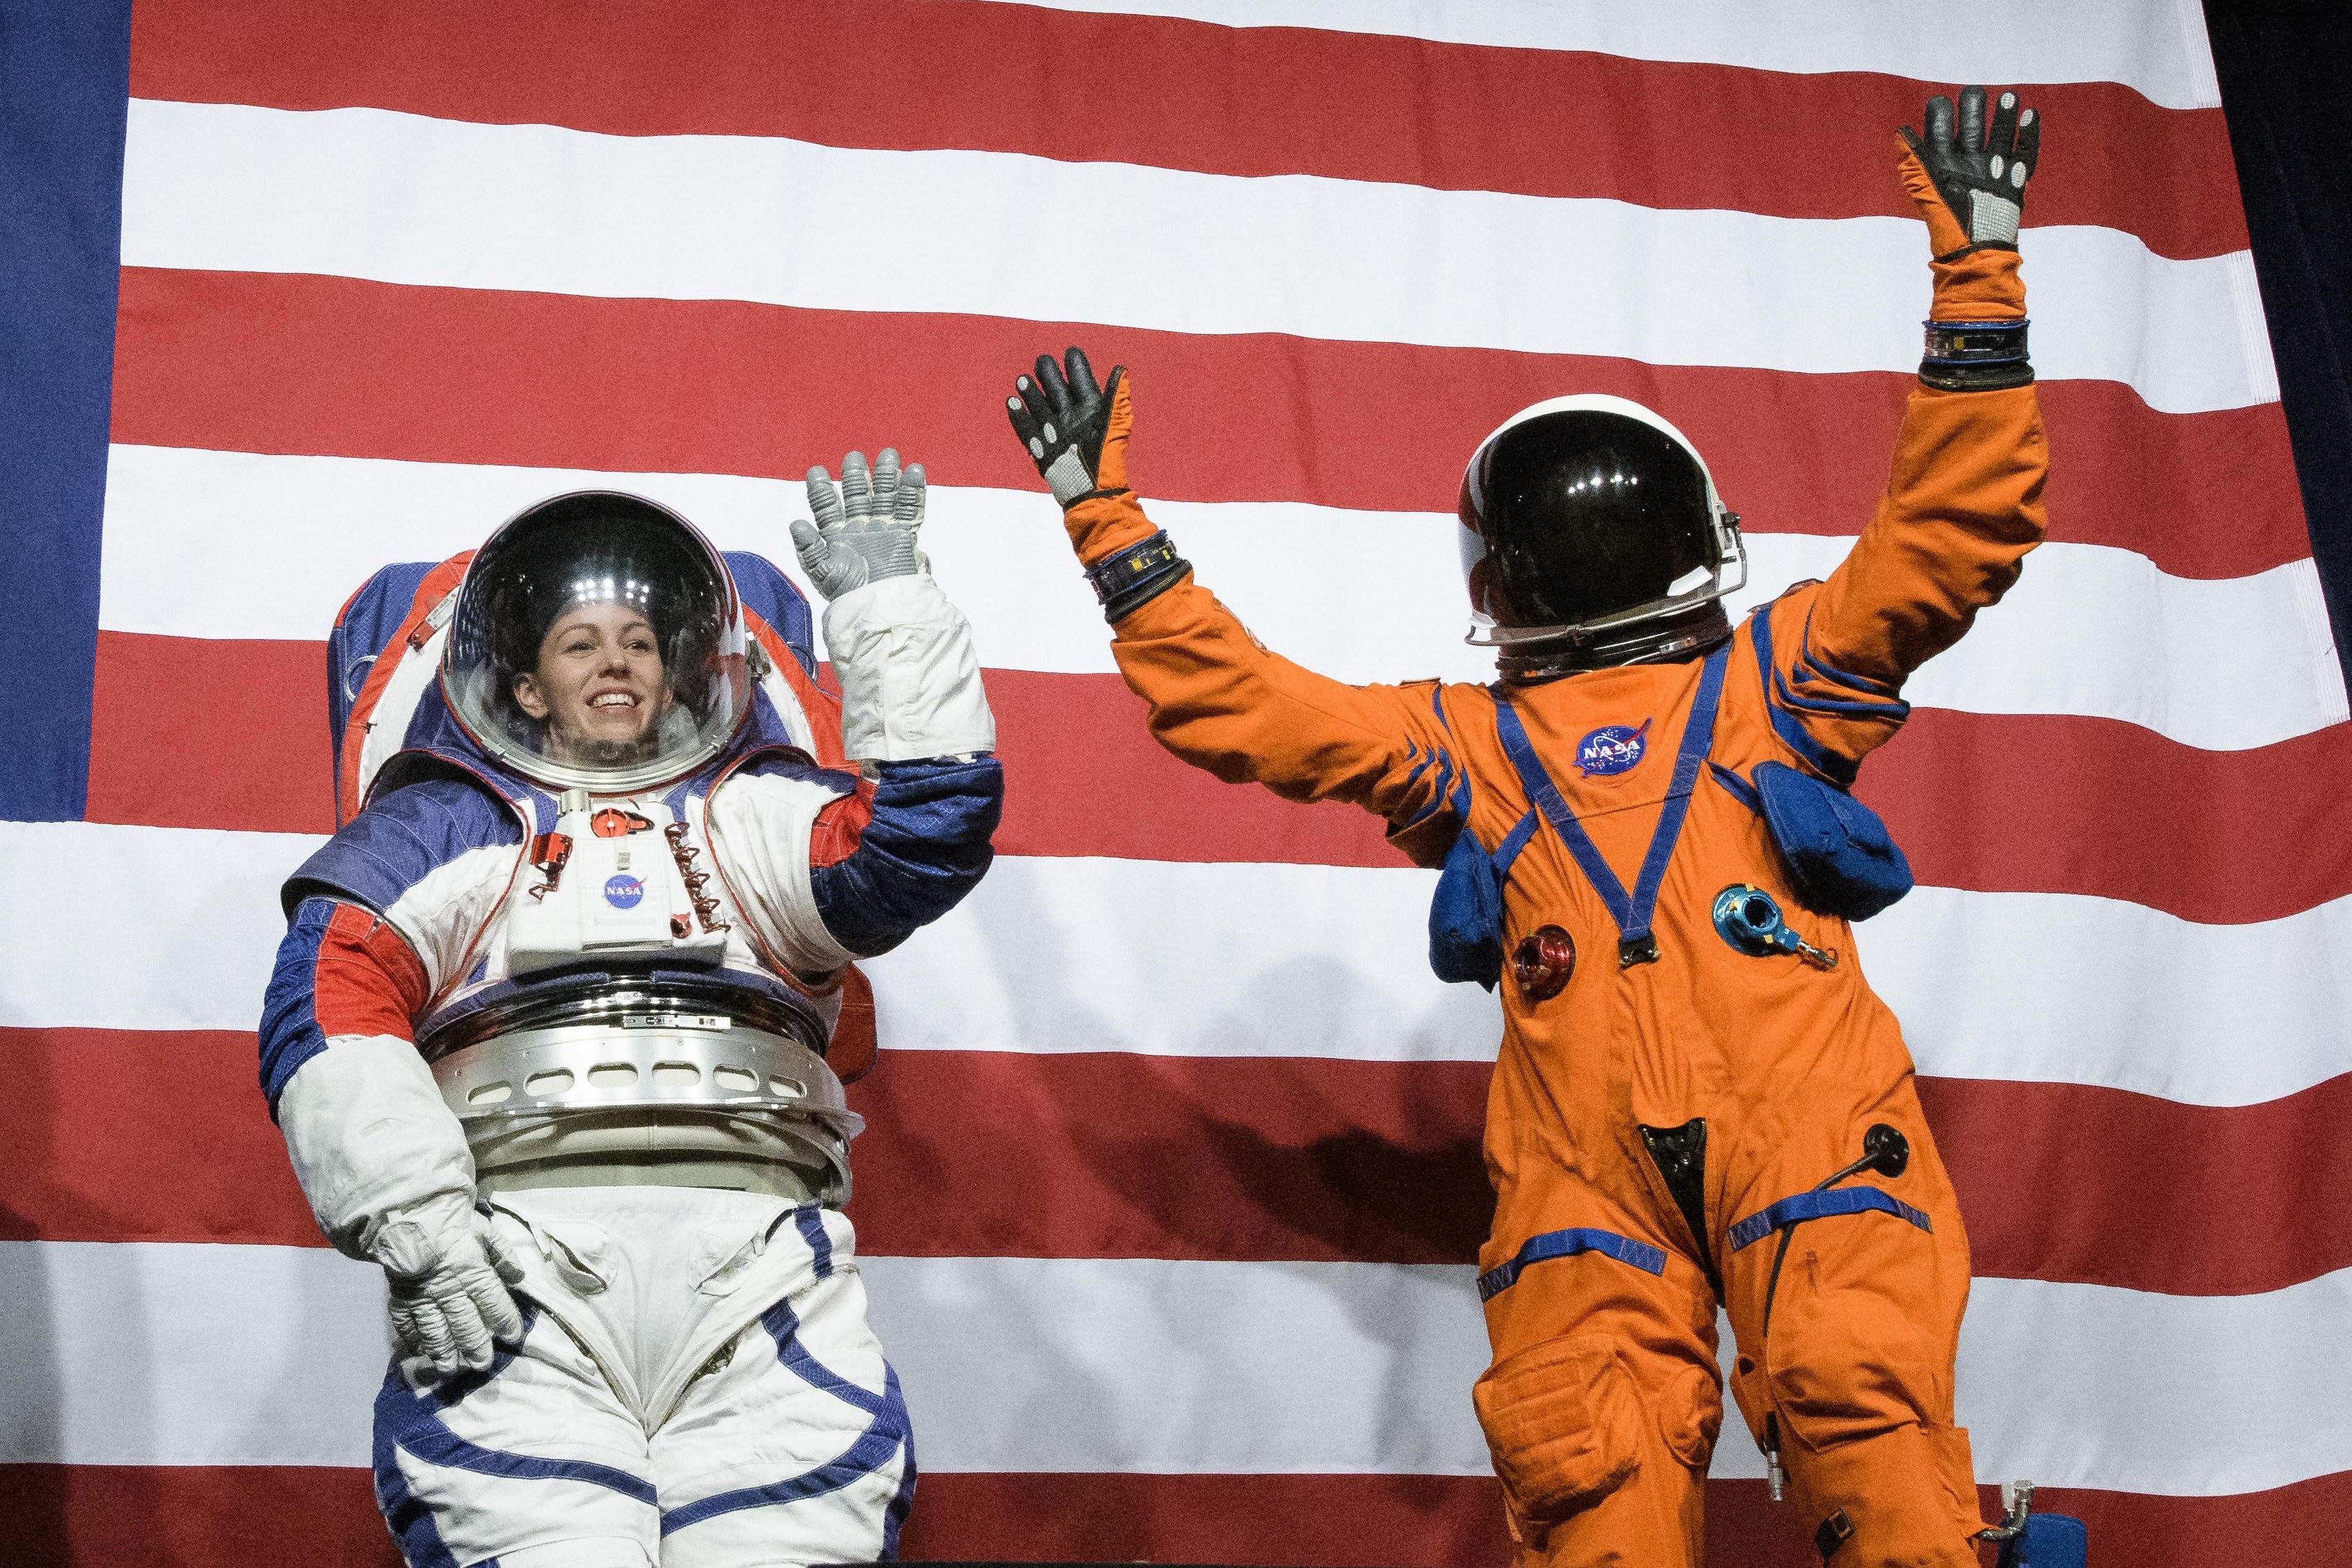 Two people stand in front of an American flag wearing spacesuits, with their hands raised in a waiving motion.